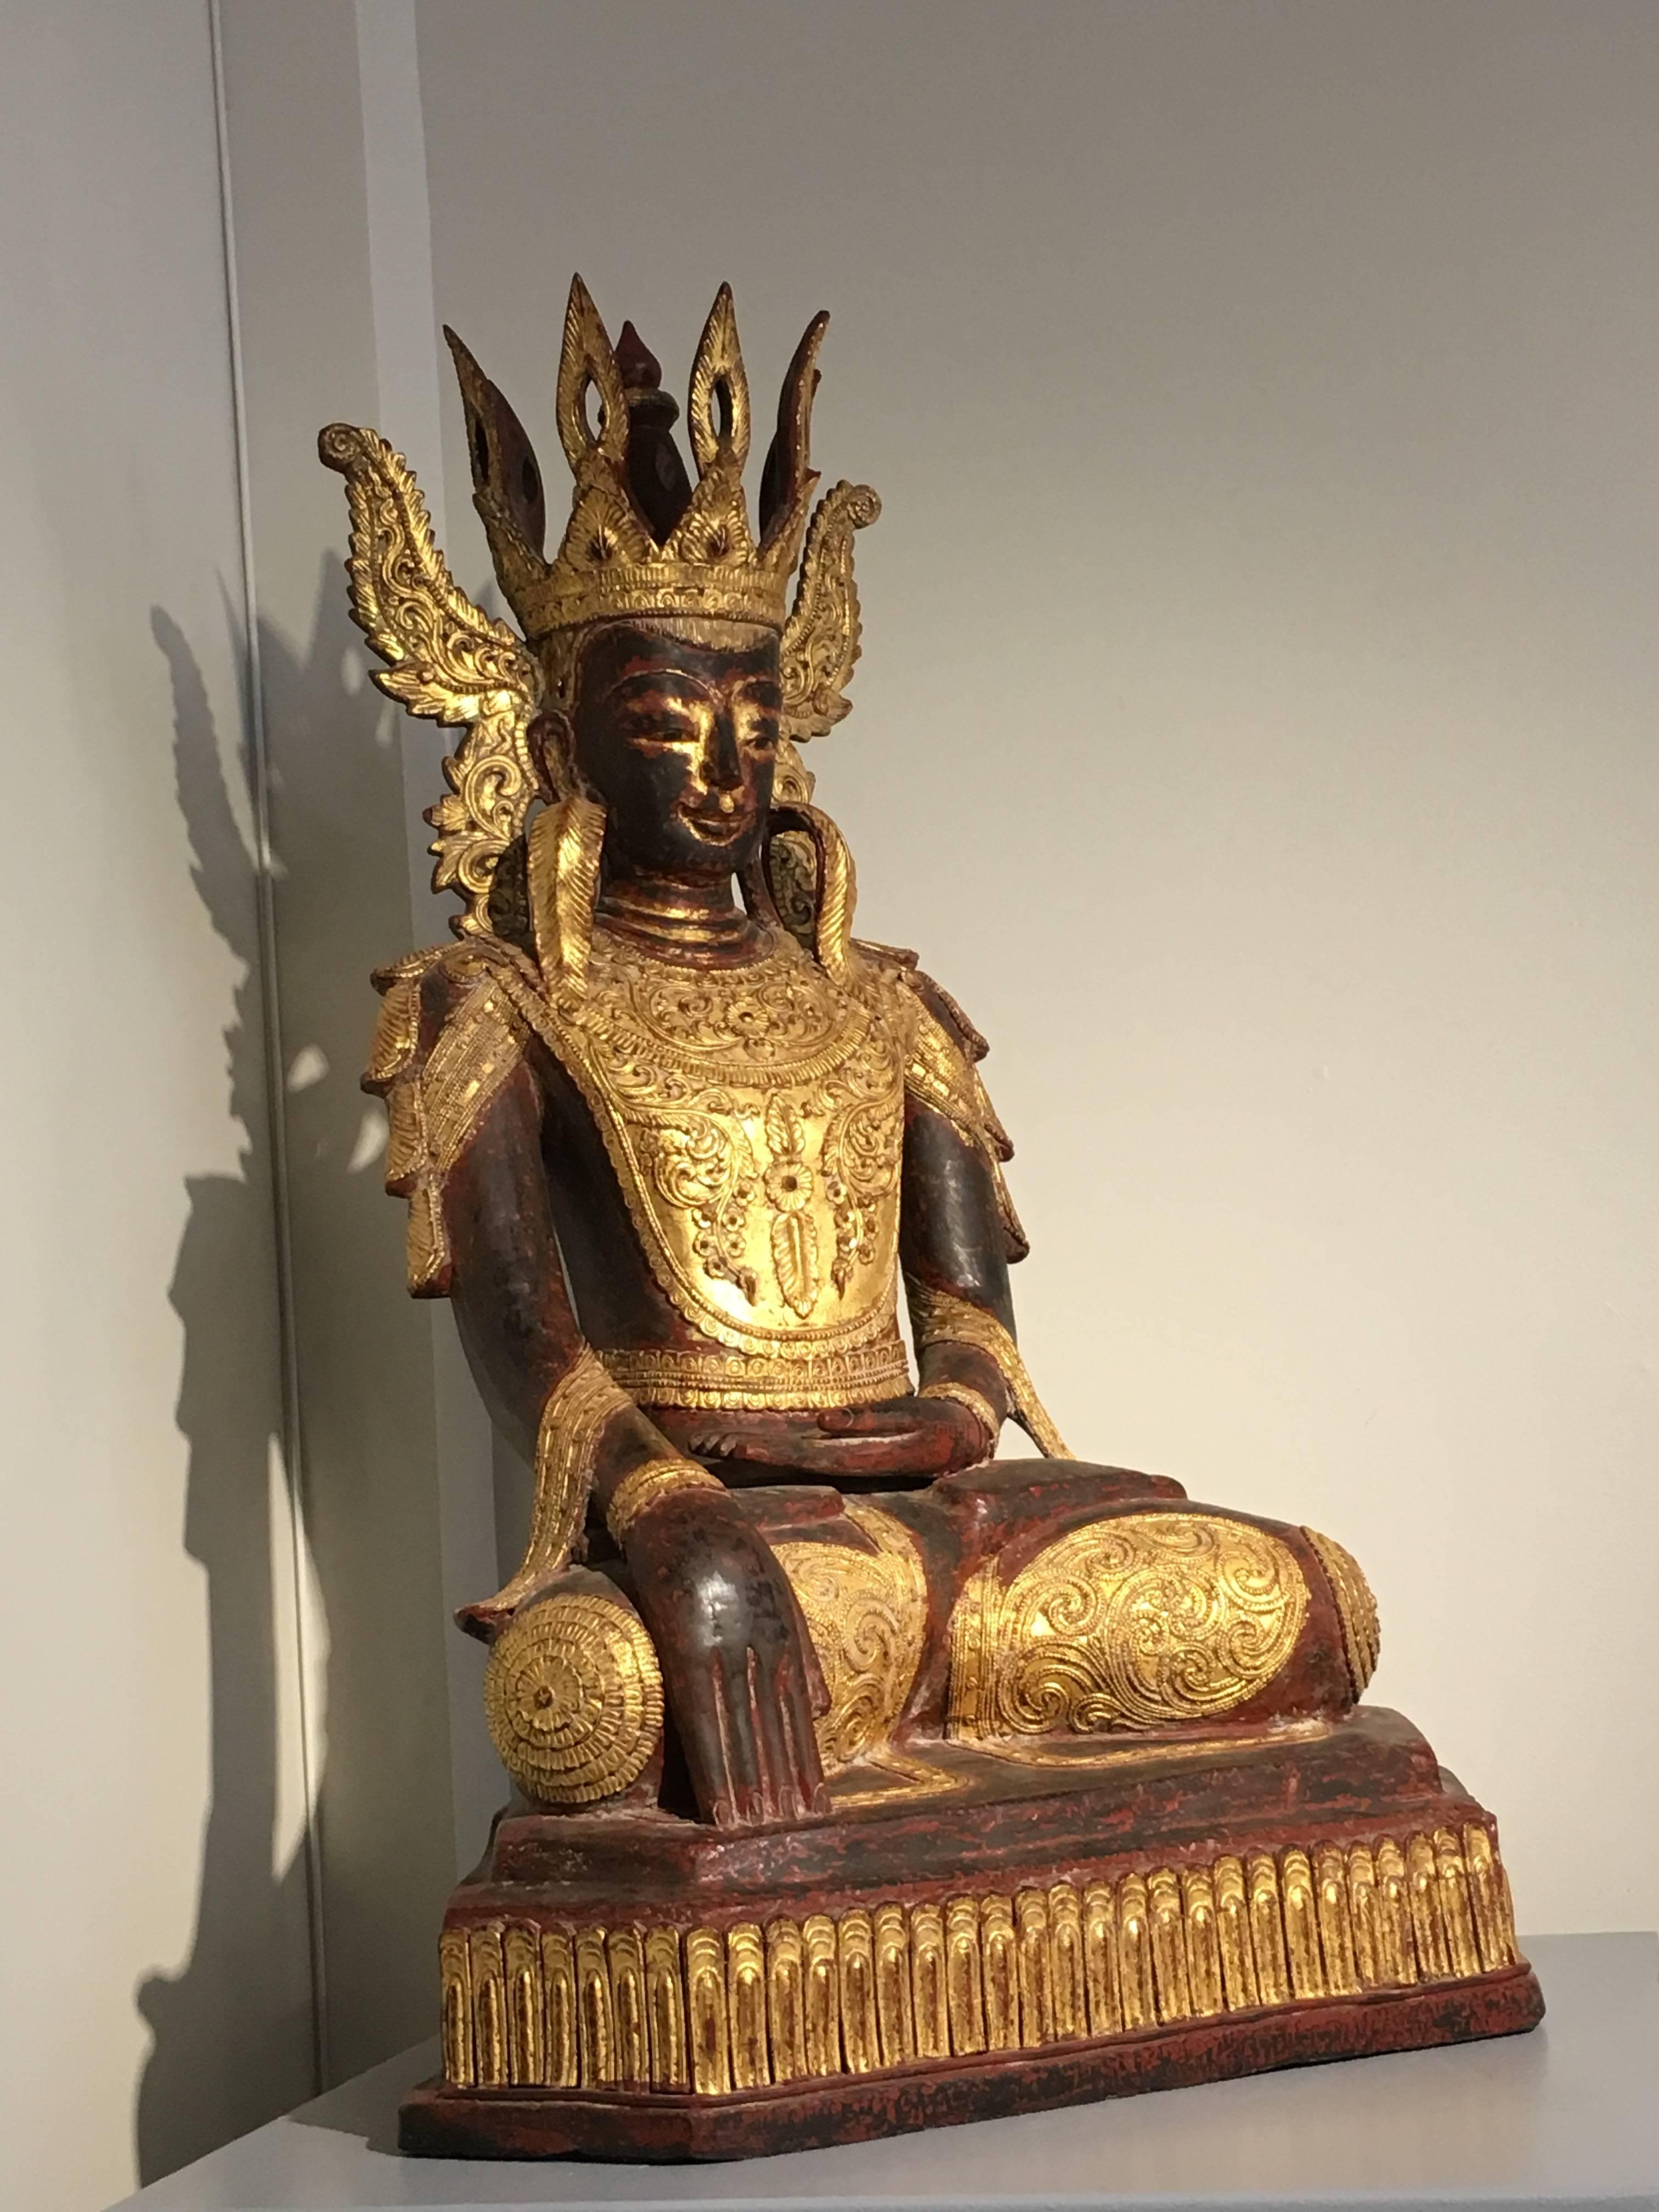 A truly stunning Shan Burmese dry lacquer crowned Buddha in royal attire, known as Jambupati Buddha, early 20th century, Burma.
The near life sized Jambupati Buddha is portrayed seated upon a stylized lotus pedestal, hands in bhumisparsha mudra (the